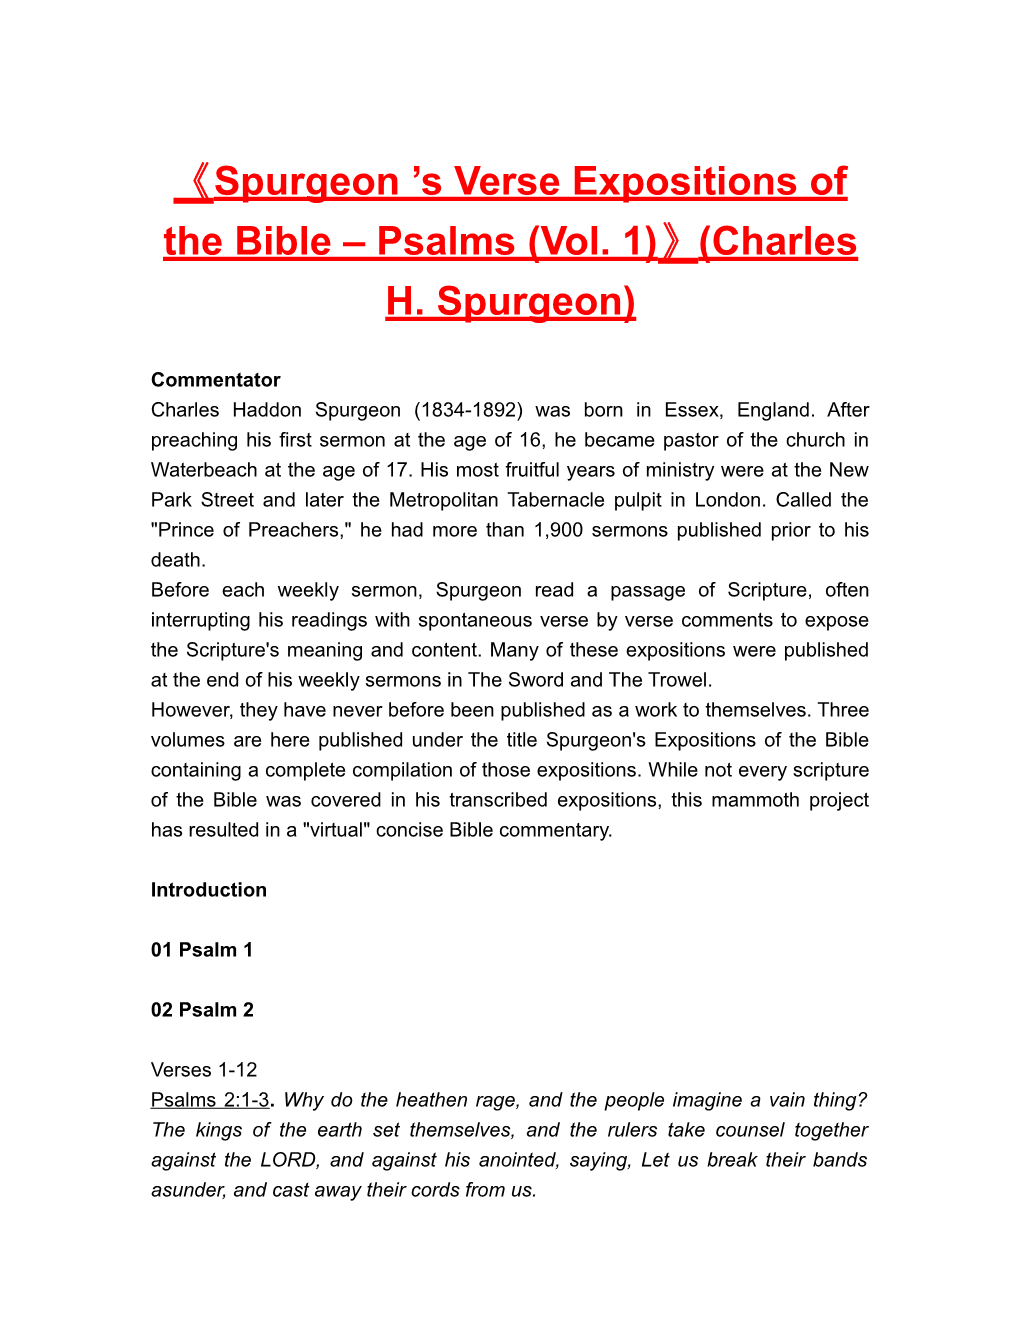 Spurgeon S Verse Expositions of the Bible Psalms (Vol. 1) (Charles H. Spurgeon)